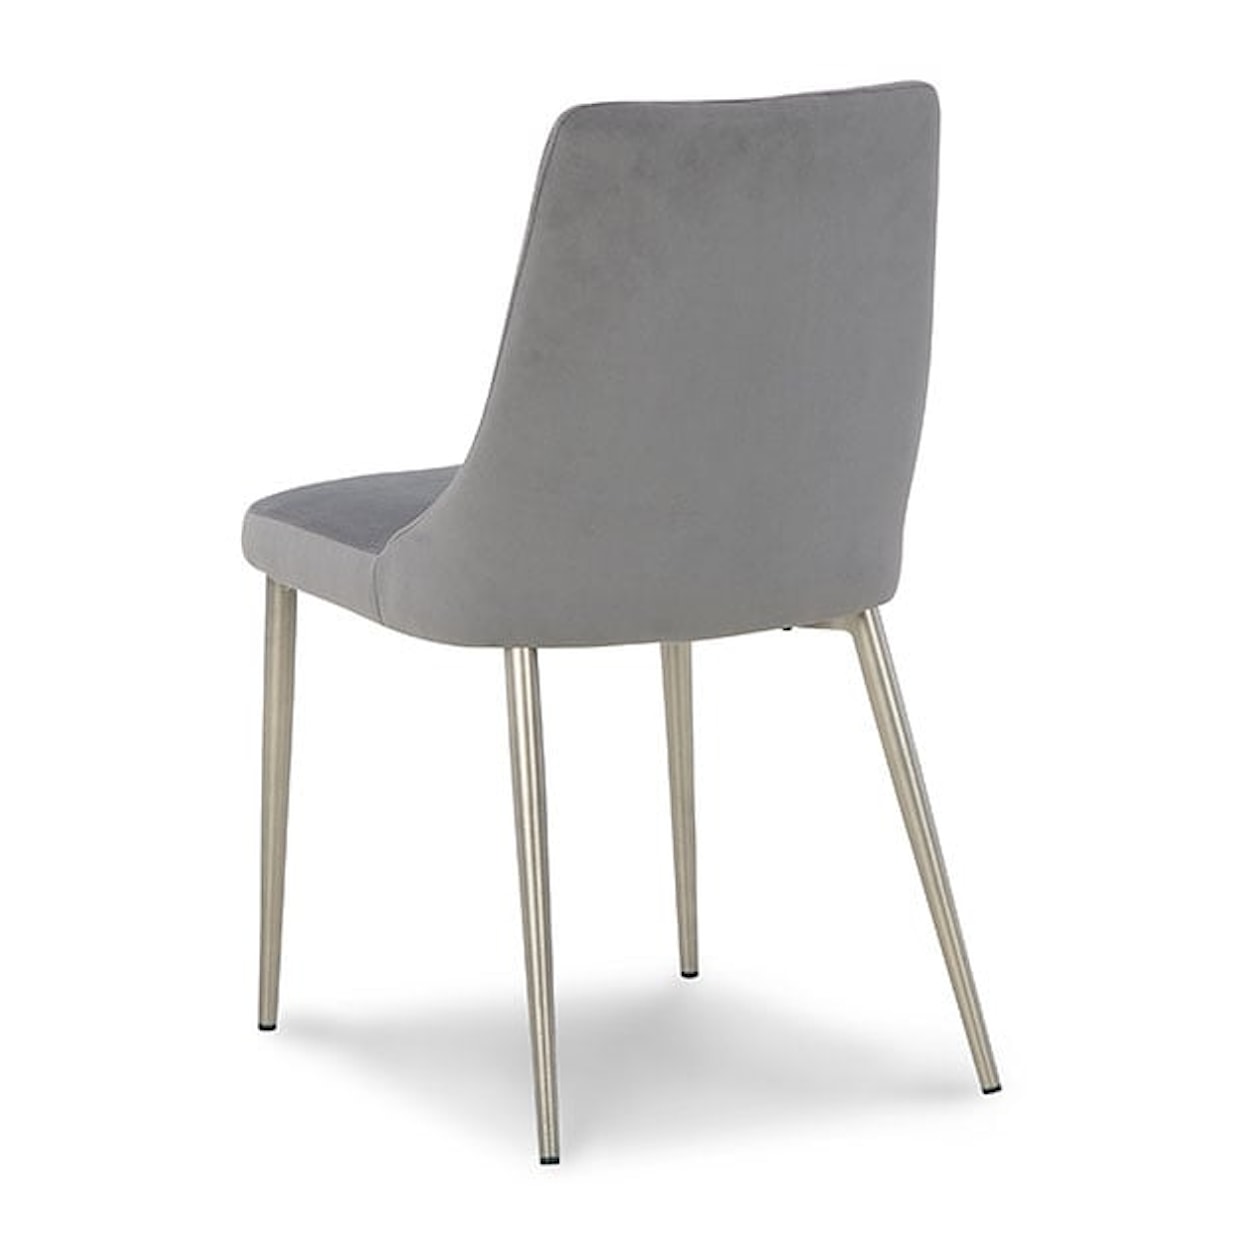 Signature Barchoni Upholstered Dining Side Chair